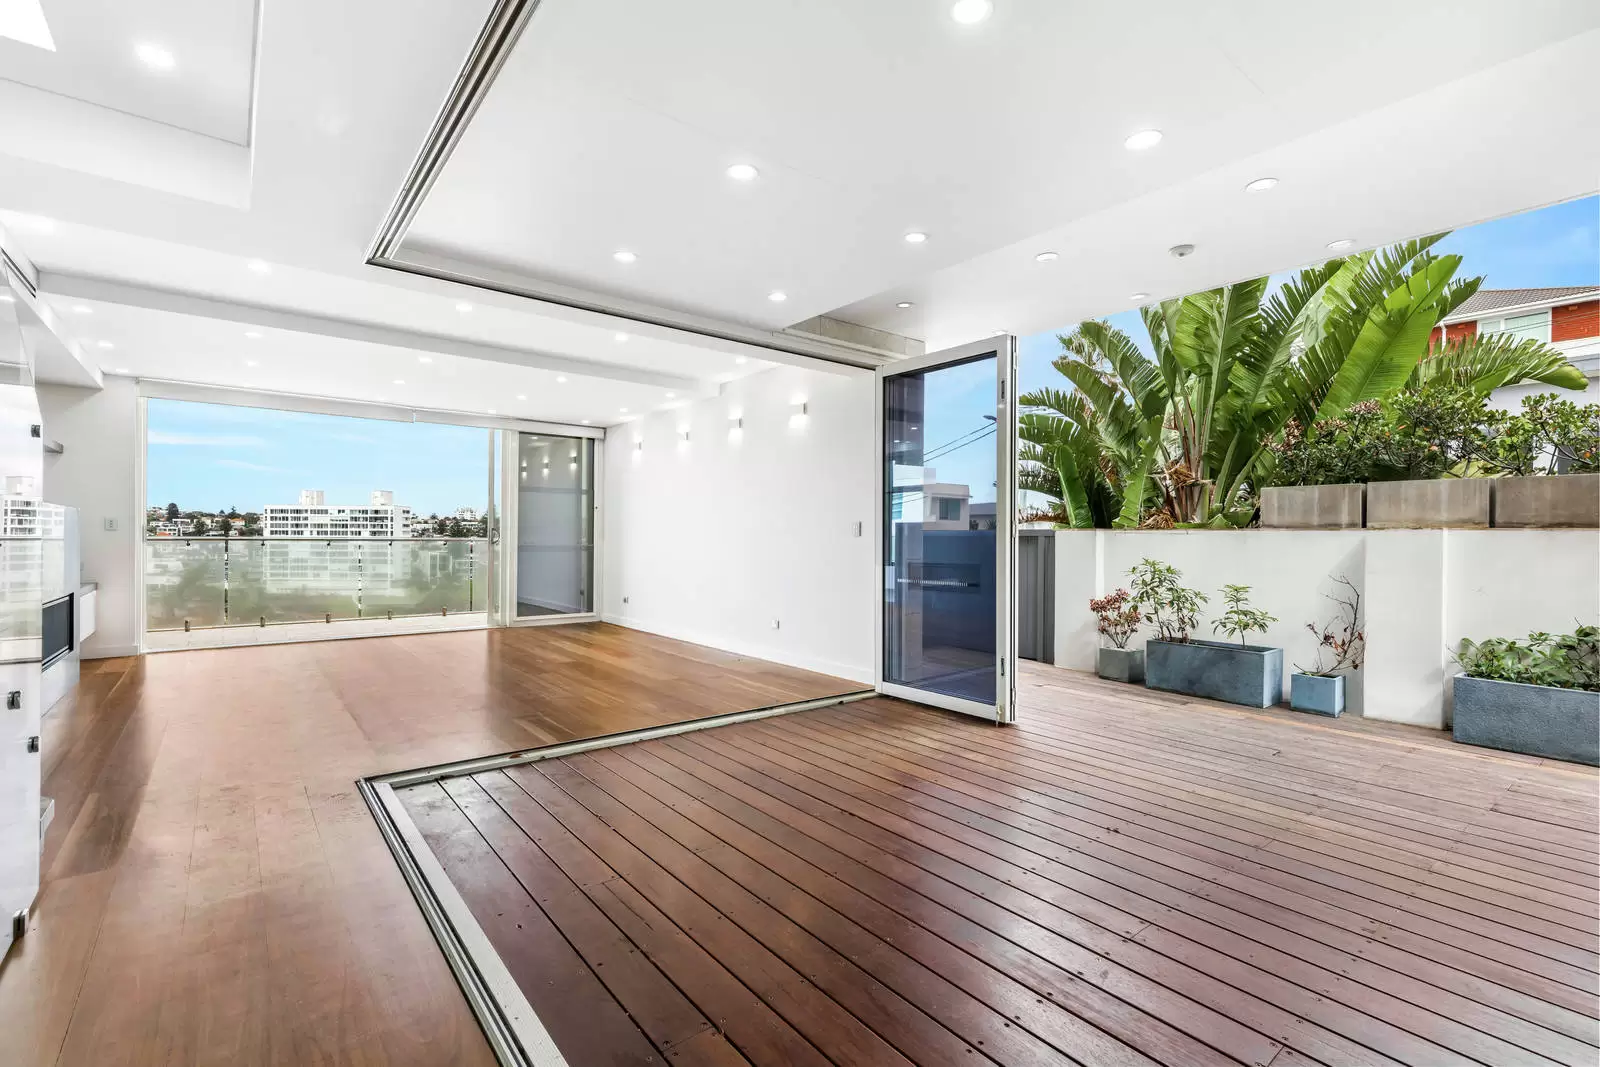 31 Macdonald Street, Vaucluse Leased by Sydney Sotheby's International Realty - image 2